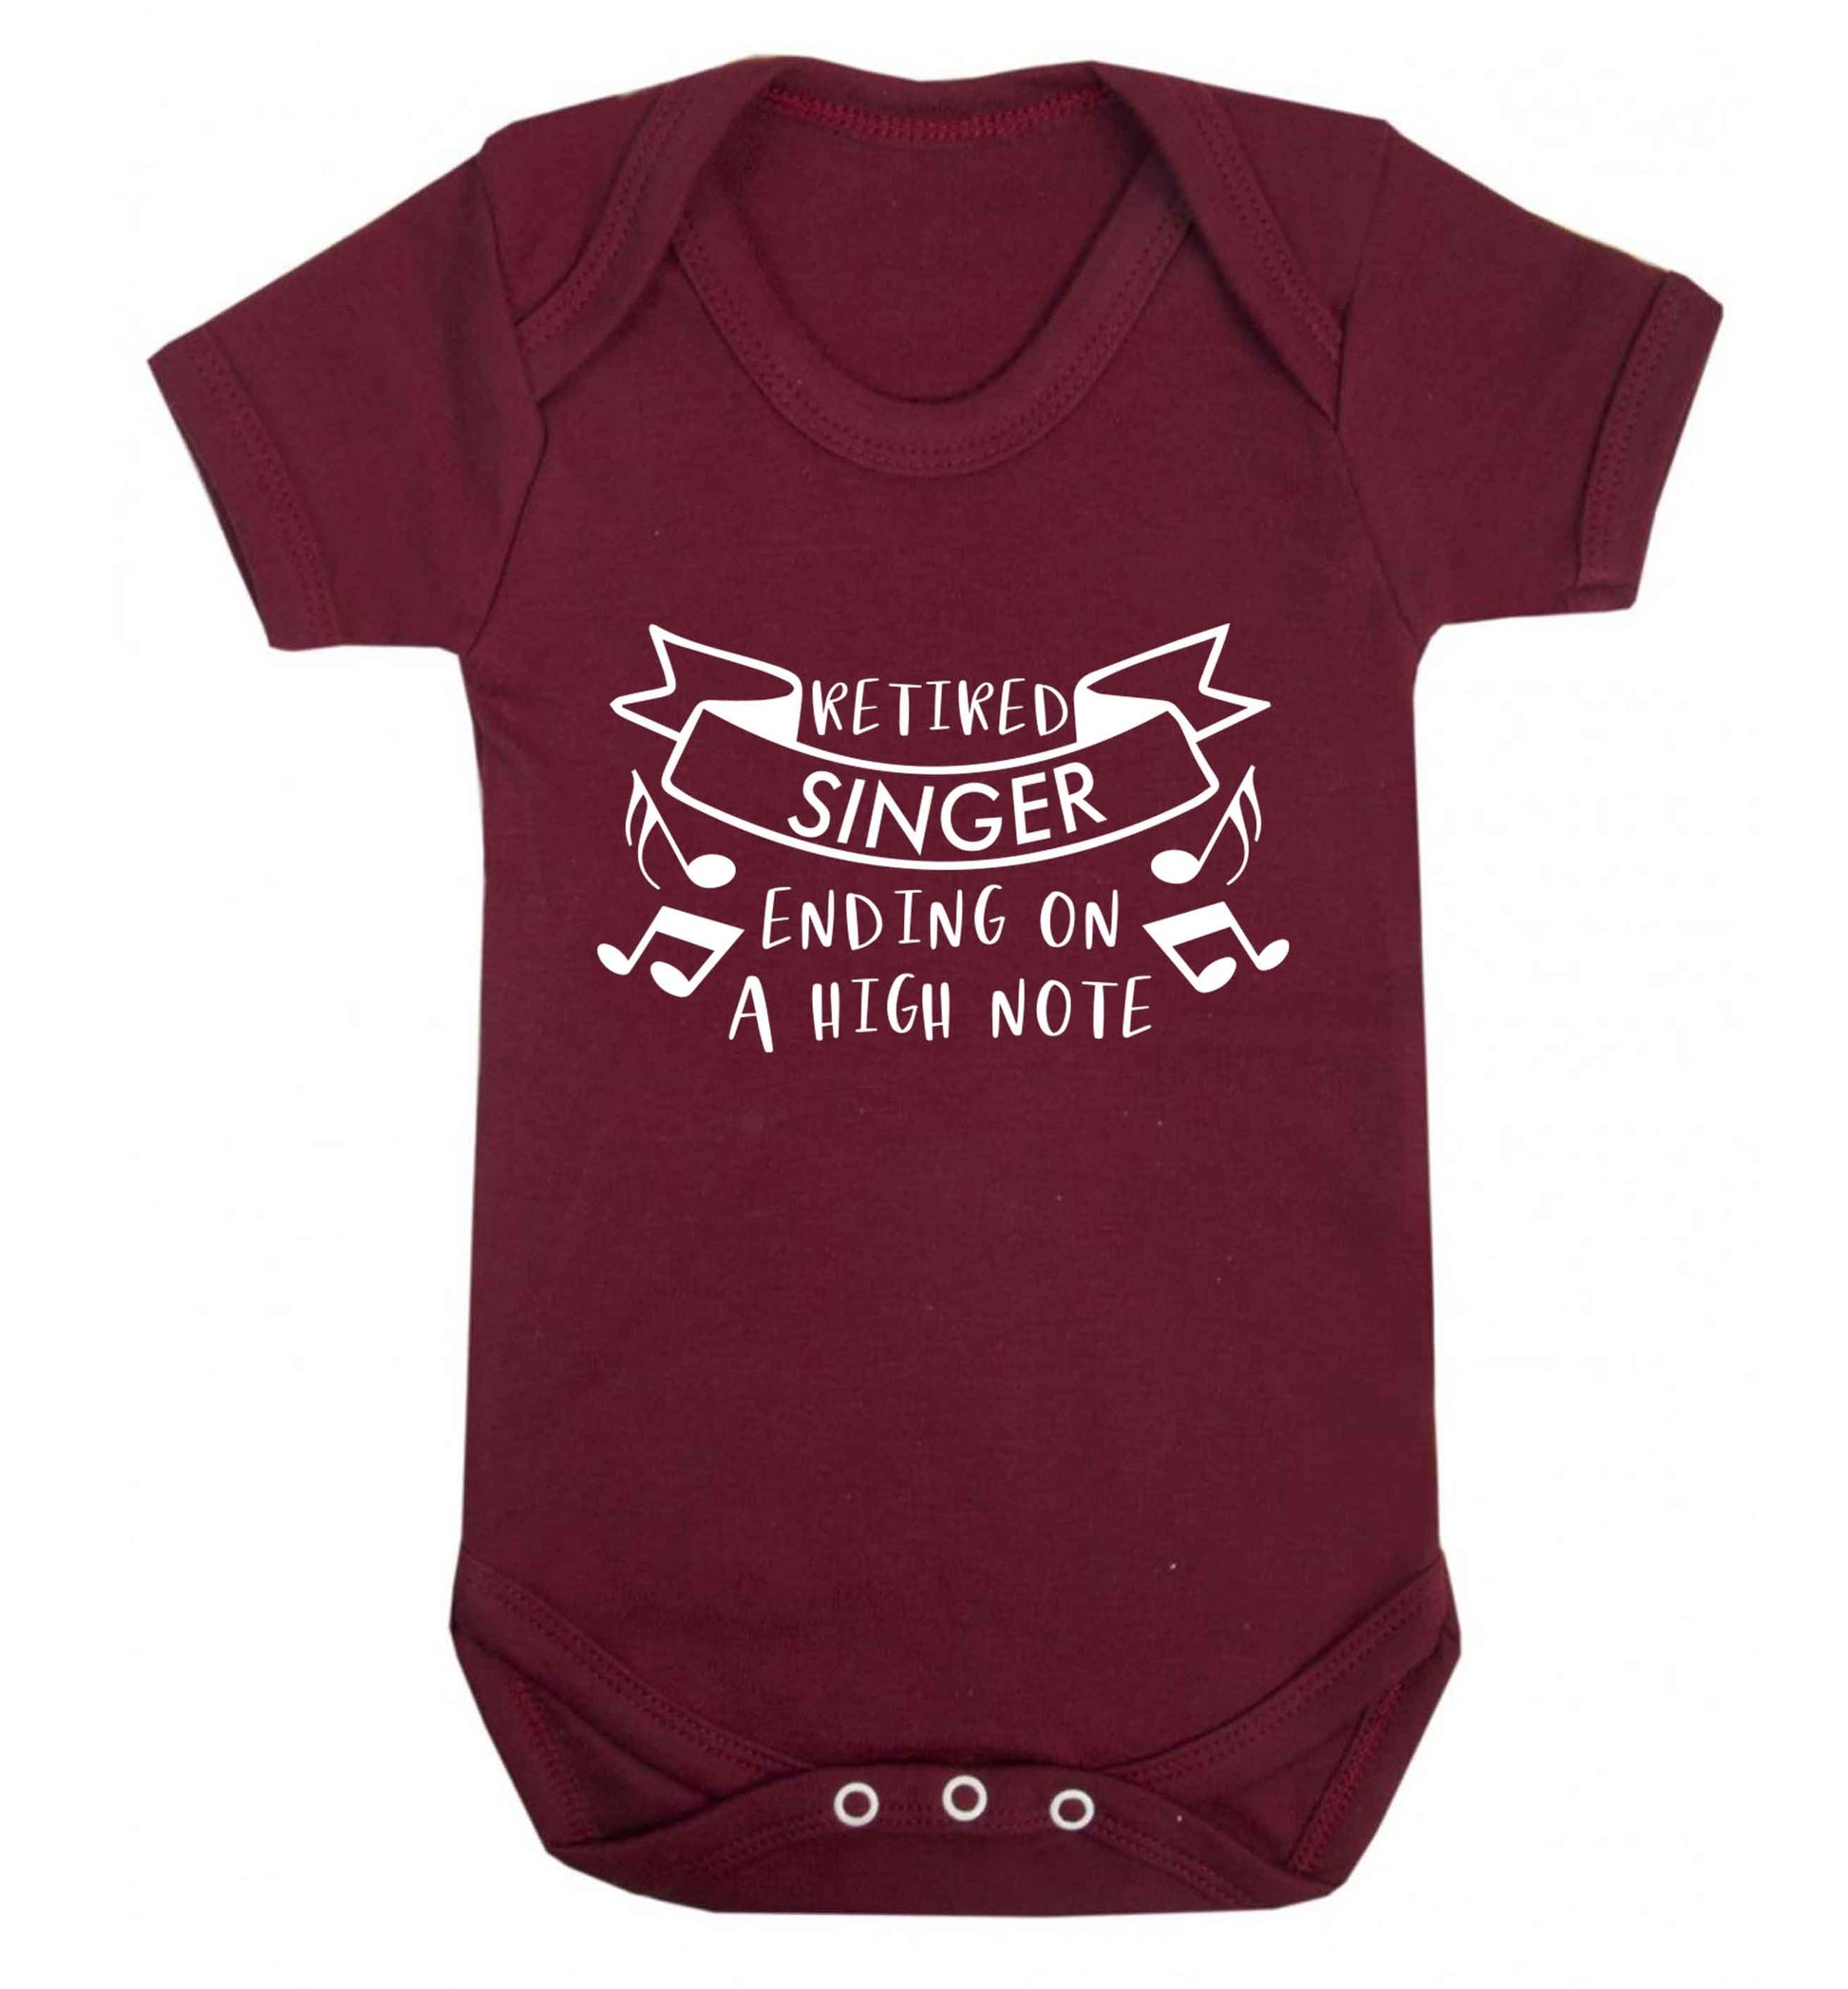 Retired singer ending on a high note Baby Vest maroon 18-24 months